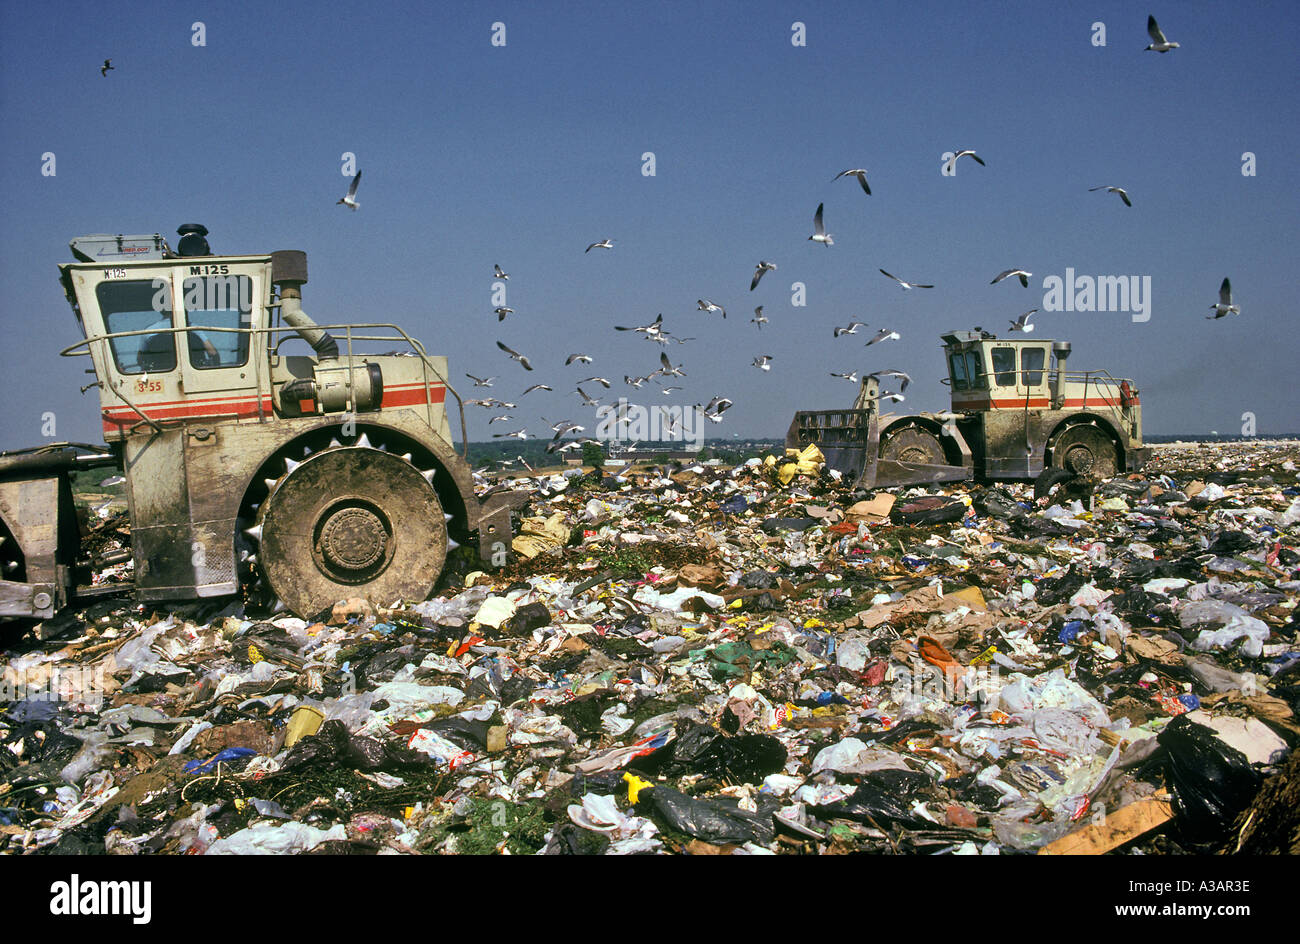 Sheepsfoot Compactor Spread the Refuse on Landfill PA Stock Photo